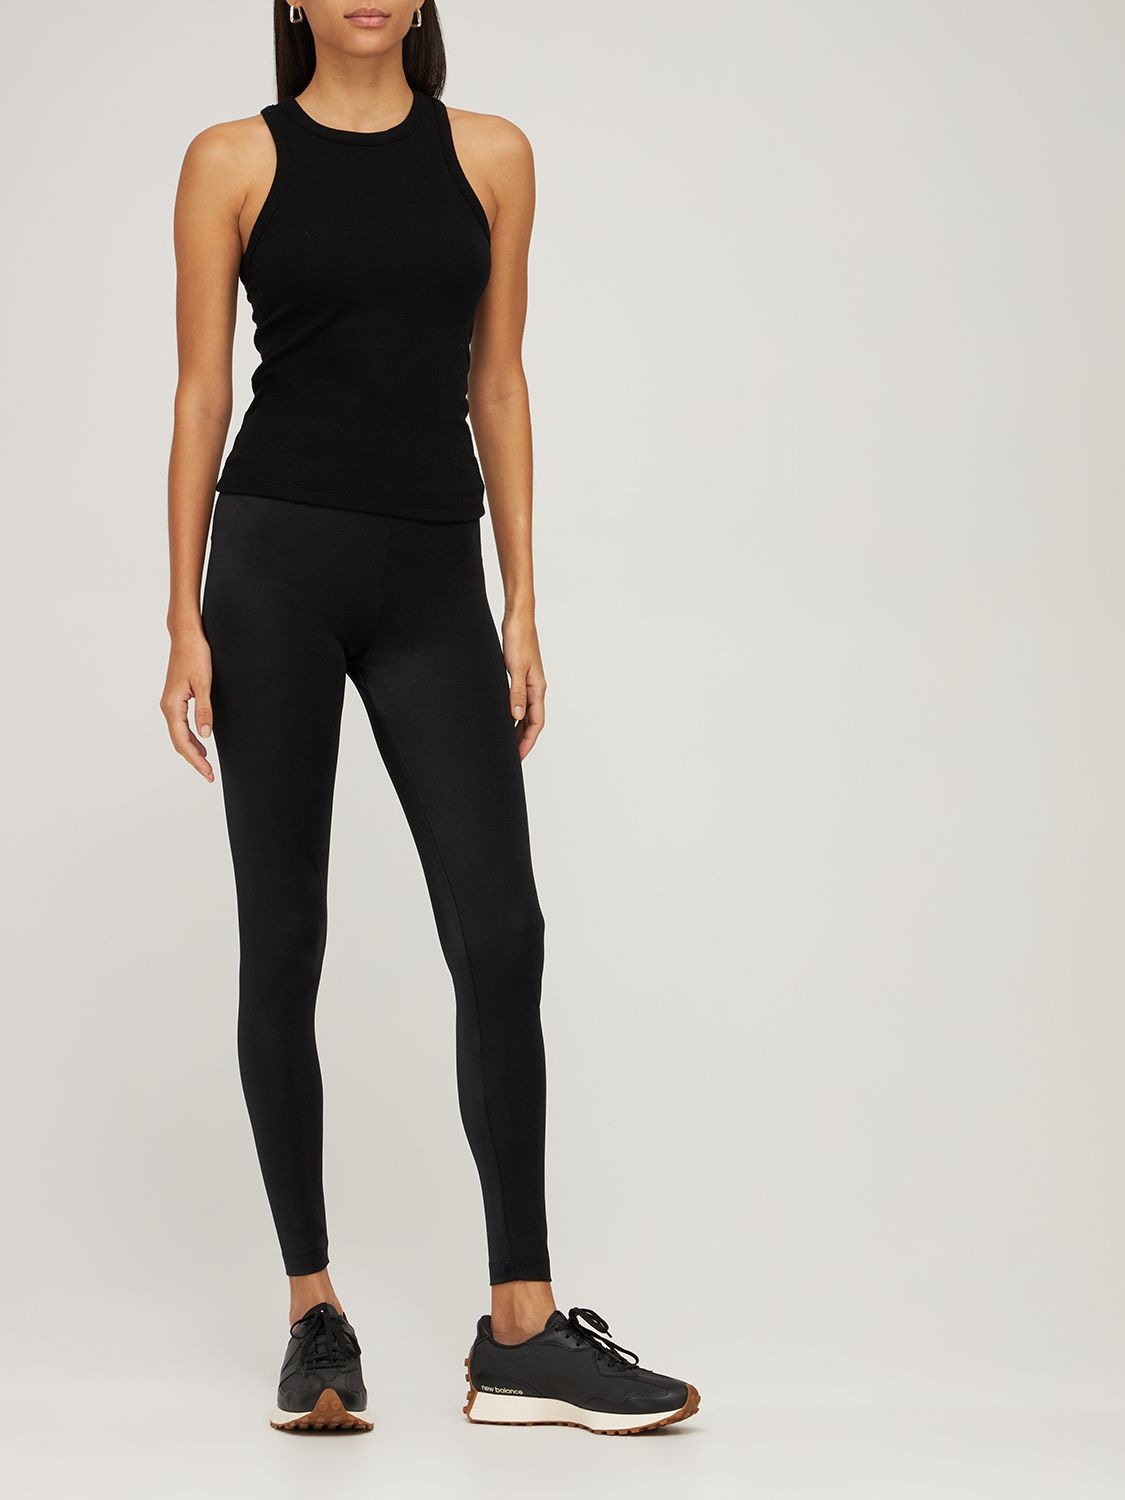 Wolford The Workout Leggings, Black, S